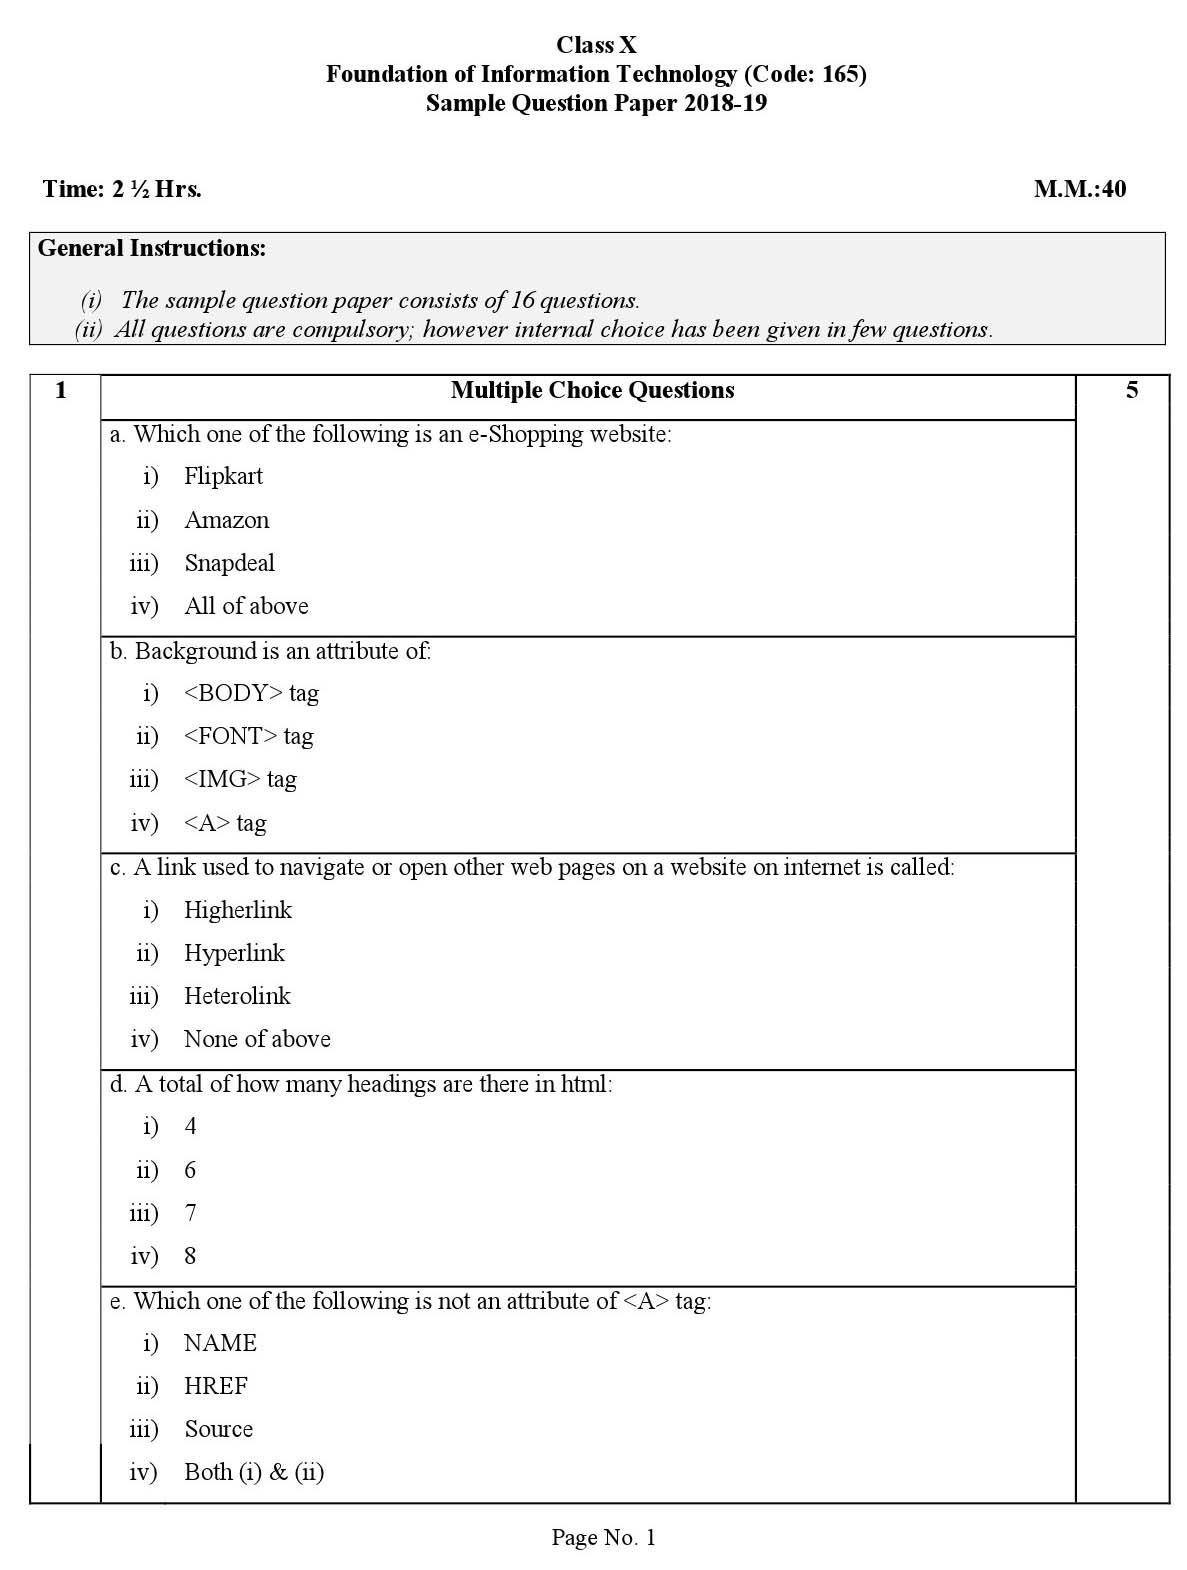 Foundation of Information Technology CBSE Class X Sample Question Paper 2018 19 - Image 1